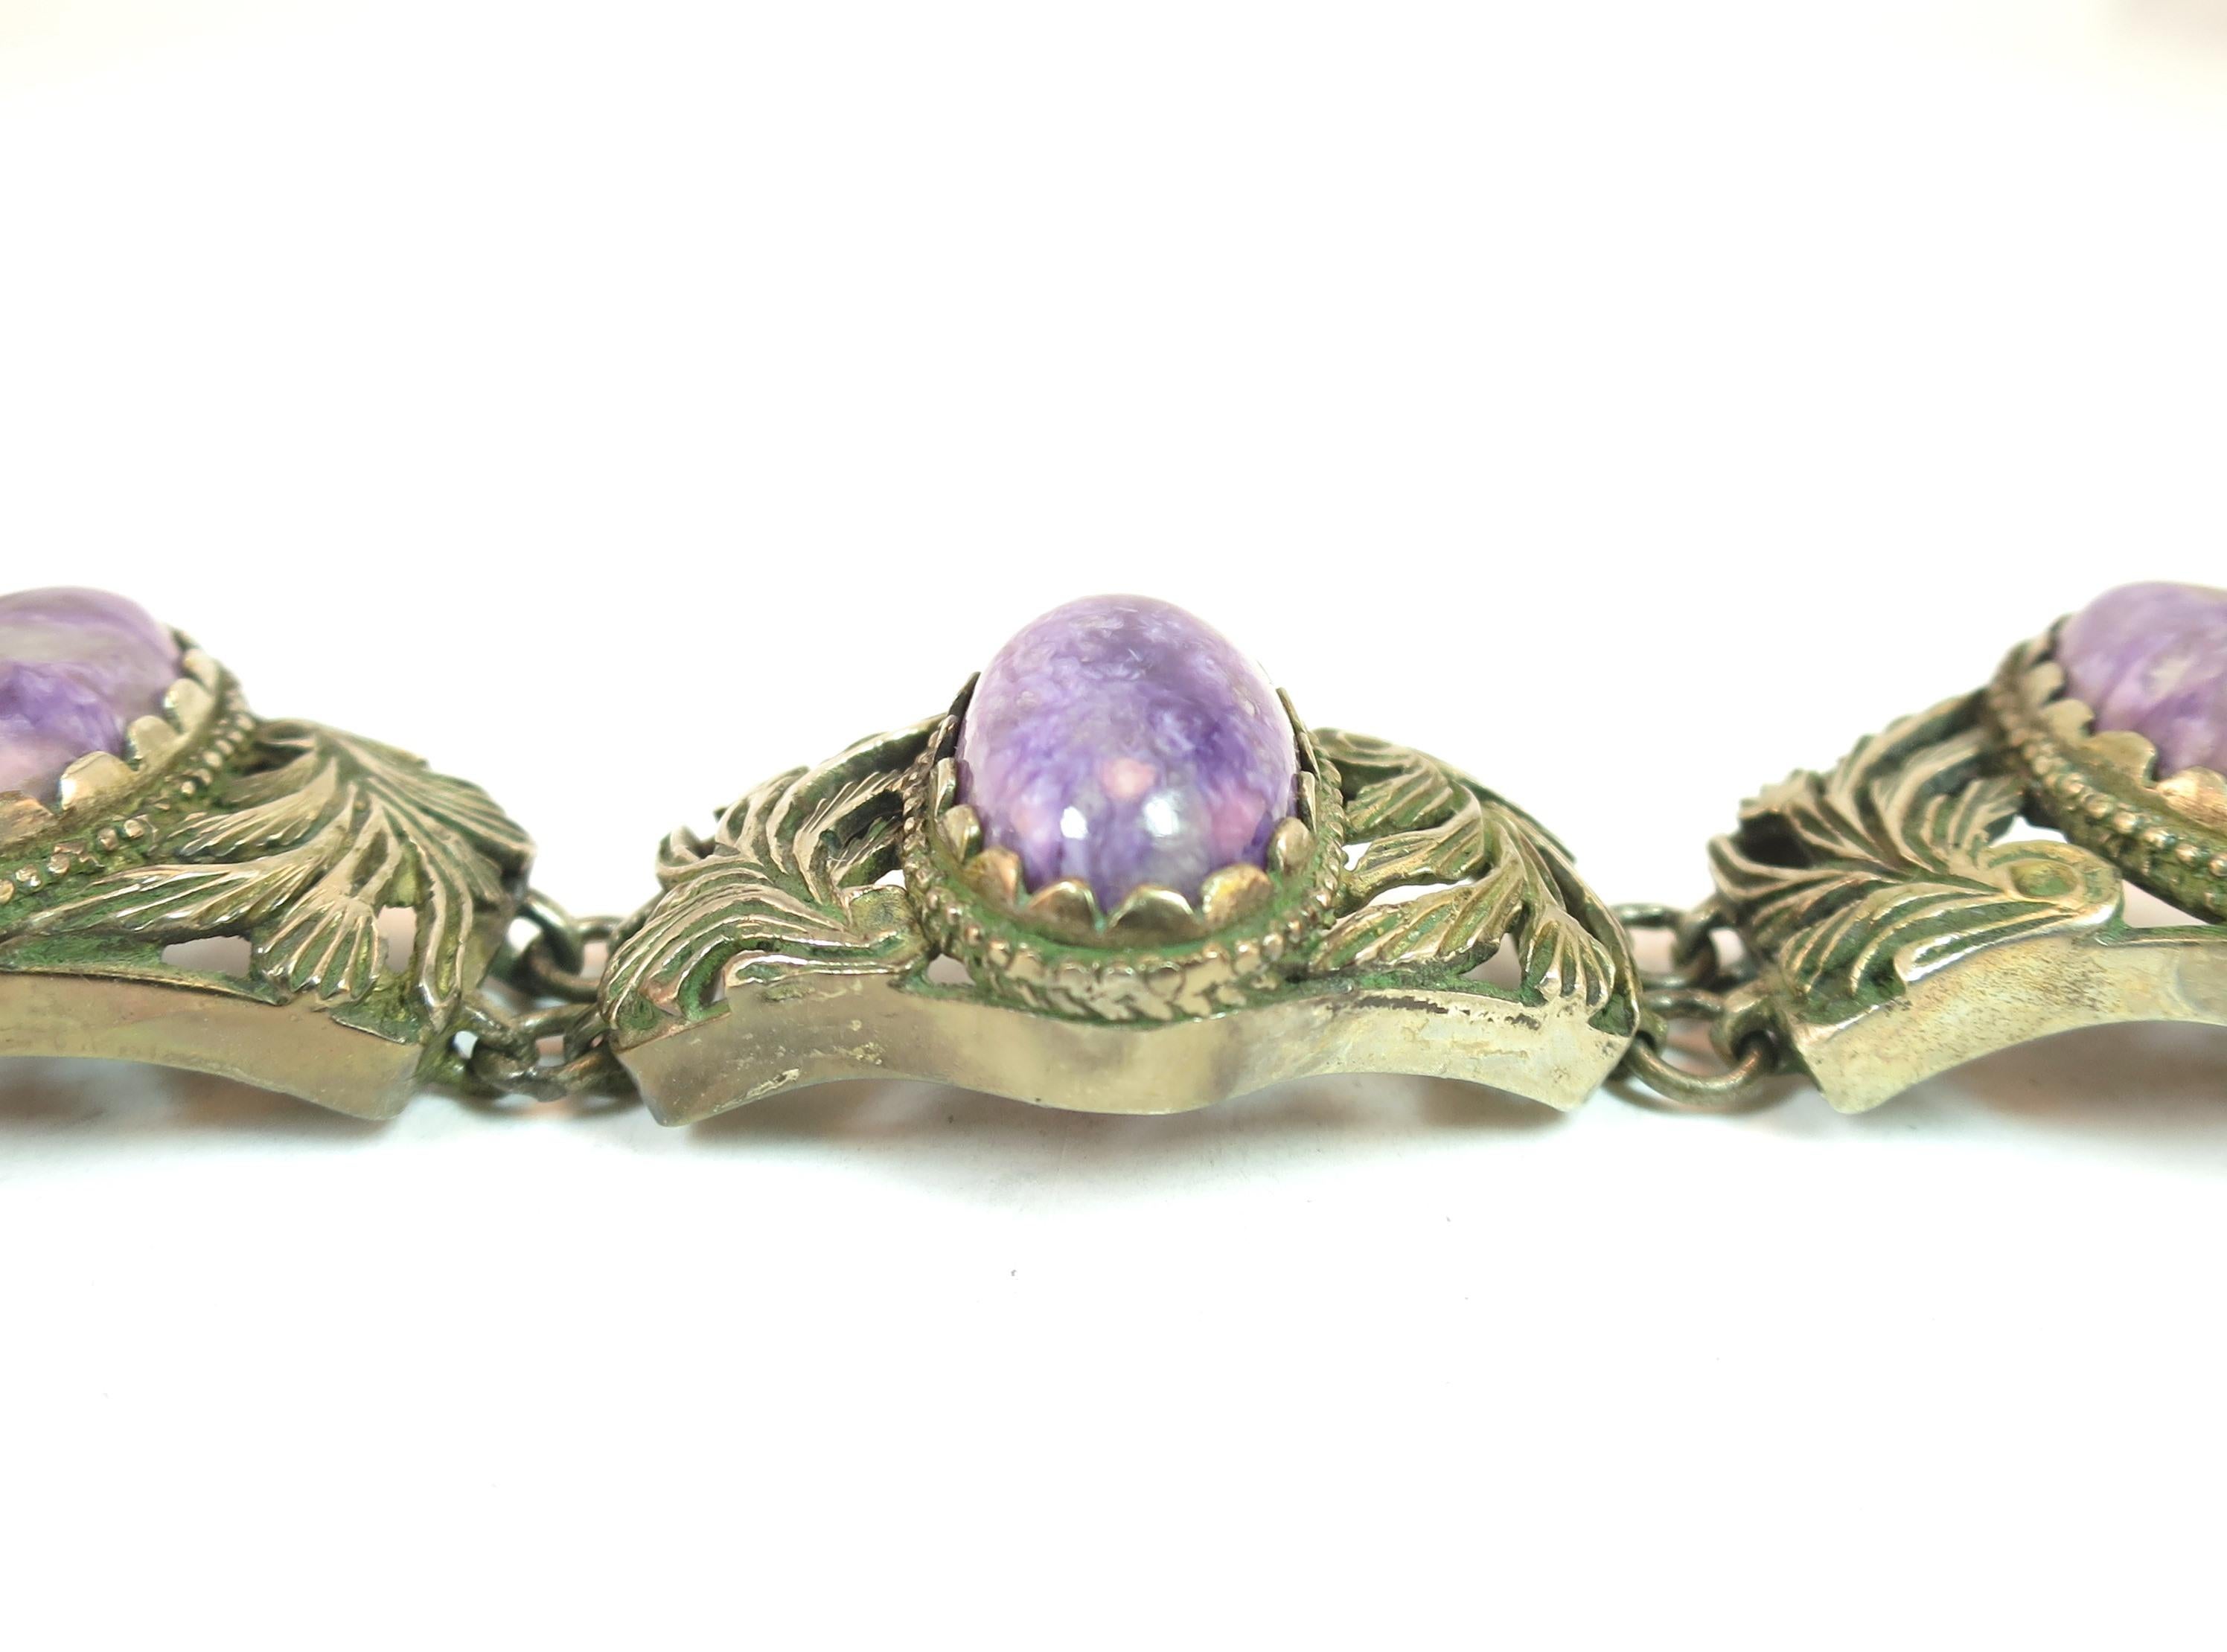 Victorian Chinese Export Silver & Amethyst Link Bracelet, Circa 1860s For Sale 3